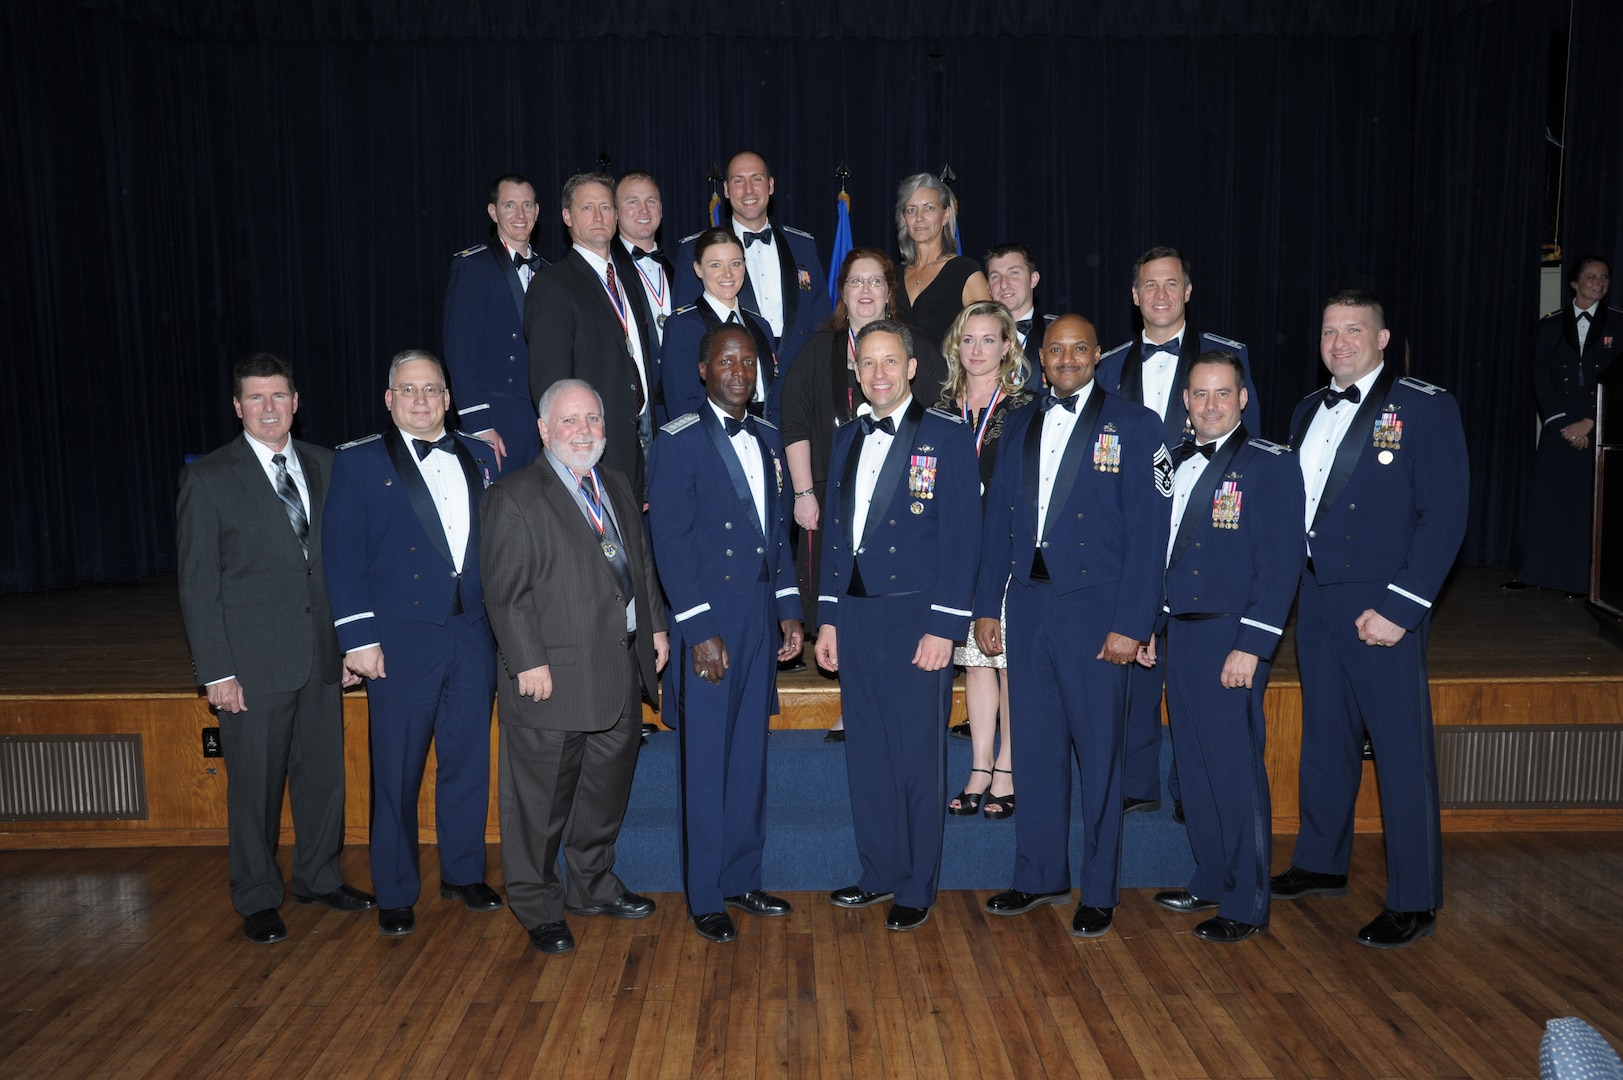 Annual award winners from the 12th Flying Training WIng's 12th Operations Group and 12th Maintenance Directorate pose for a photo with Gen. Edward Rice, Air Education and Training Command commander (center), and 12th FTW leadership after receiving their awards at the Parr O'Club at Joint Base San Antonio-Randolph, Texas, January 25, 2013.  Due to the geographically separated nature of the 12th FTW, members stationed with the wing's 306th and 479th Flying Training Groups were not able to attend the event.  Instead they were honored at individual events at their respective home stations, the U.S. Air Force Academy, Colo., and Naval Air Station Pensacola, Fla., on January 28 and 29.  Typically all nominees are sent TDY to the ceremony, but having separate events saved the wing nearly $30,000.